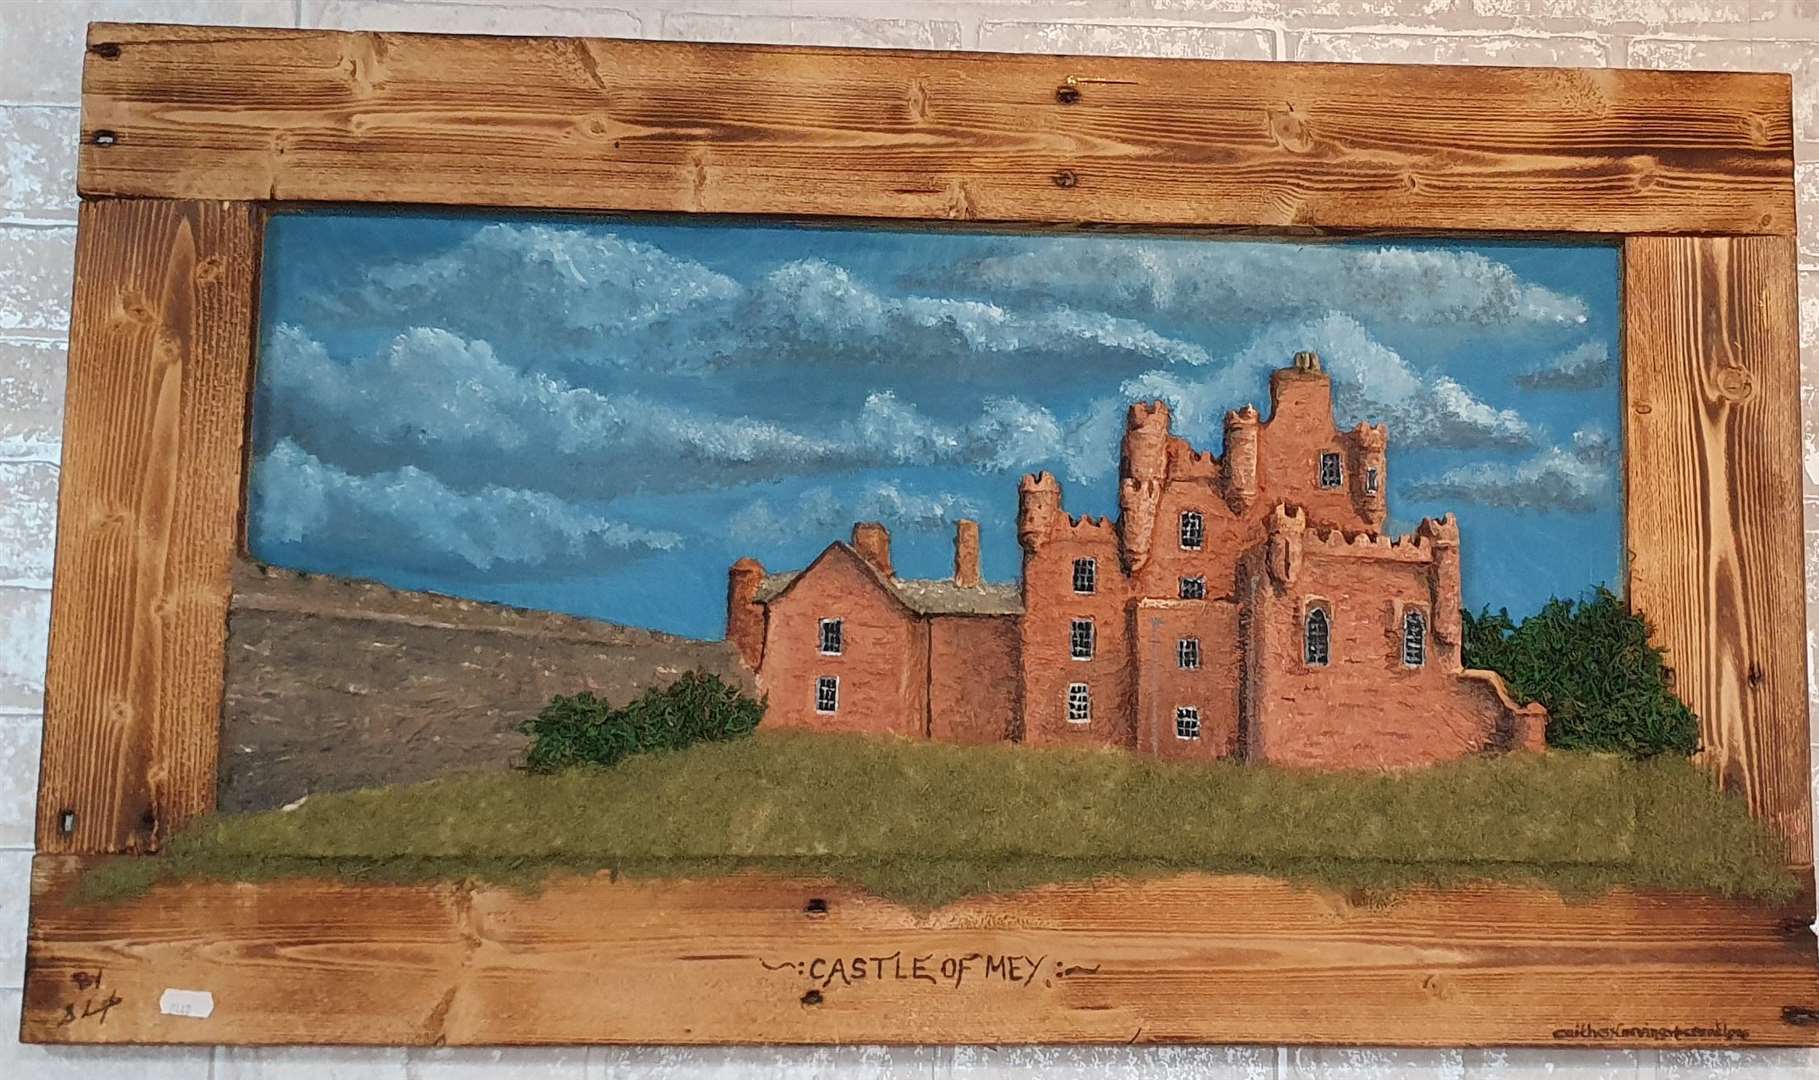 Castle of Mey by Scott Livingstone of Caithness Carvings and Creations.  He specializes in hand carved Caithness stone images, house names/numbers and table lamps.  3D images of buildings or landscapes and the odd furniture with a 10,000V wood burner and any color resin, all made to order.